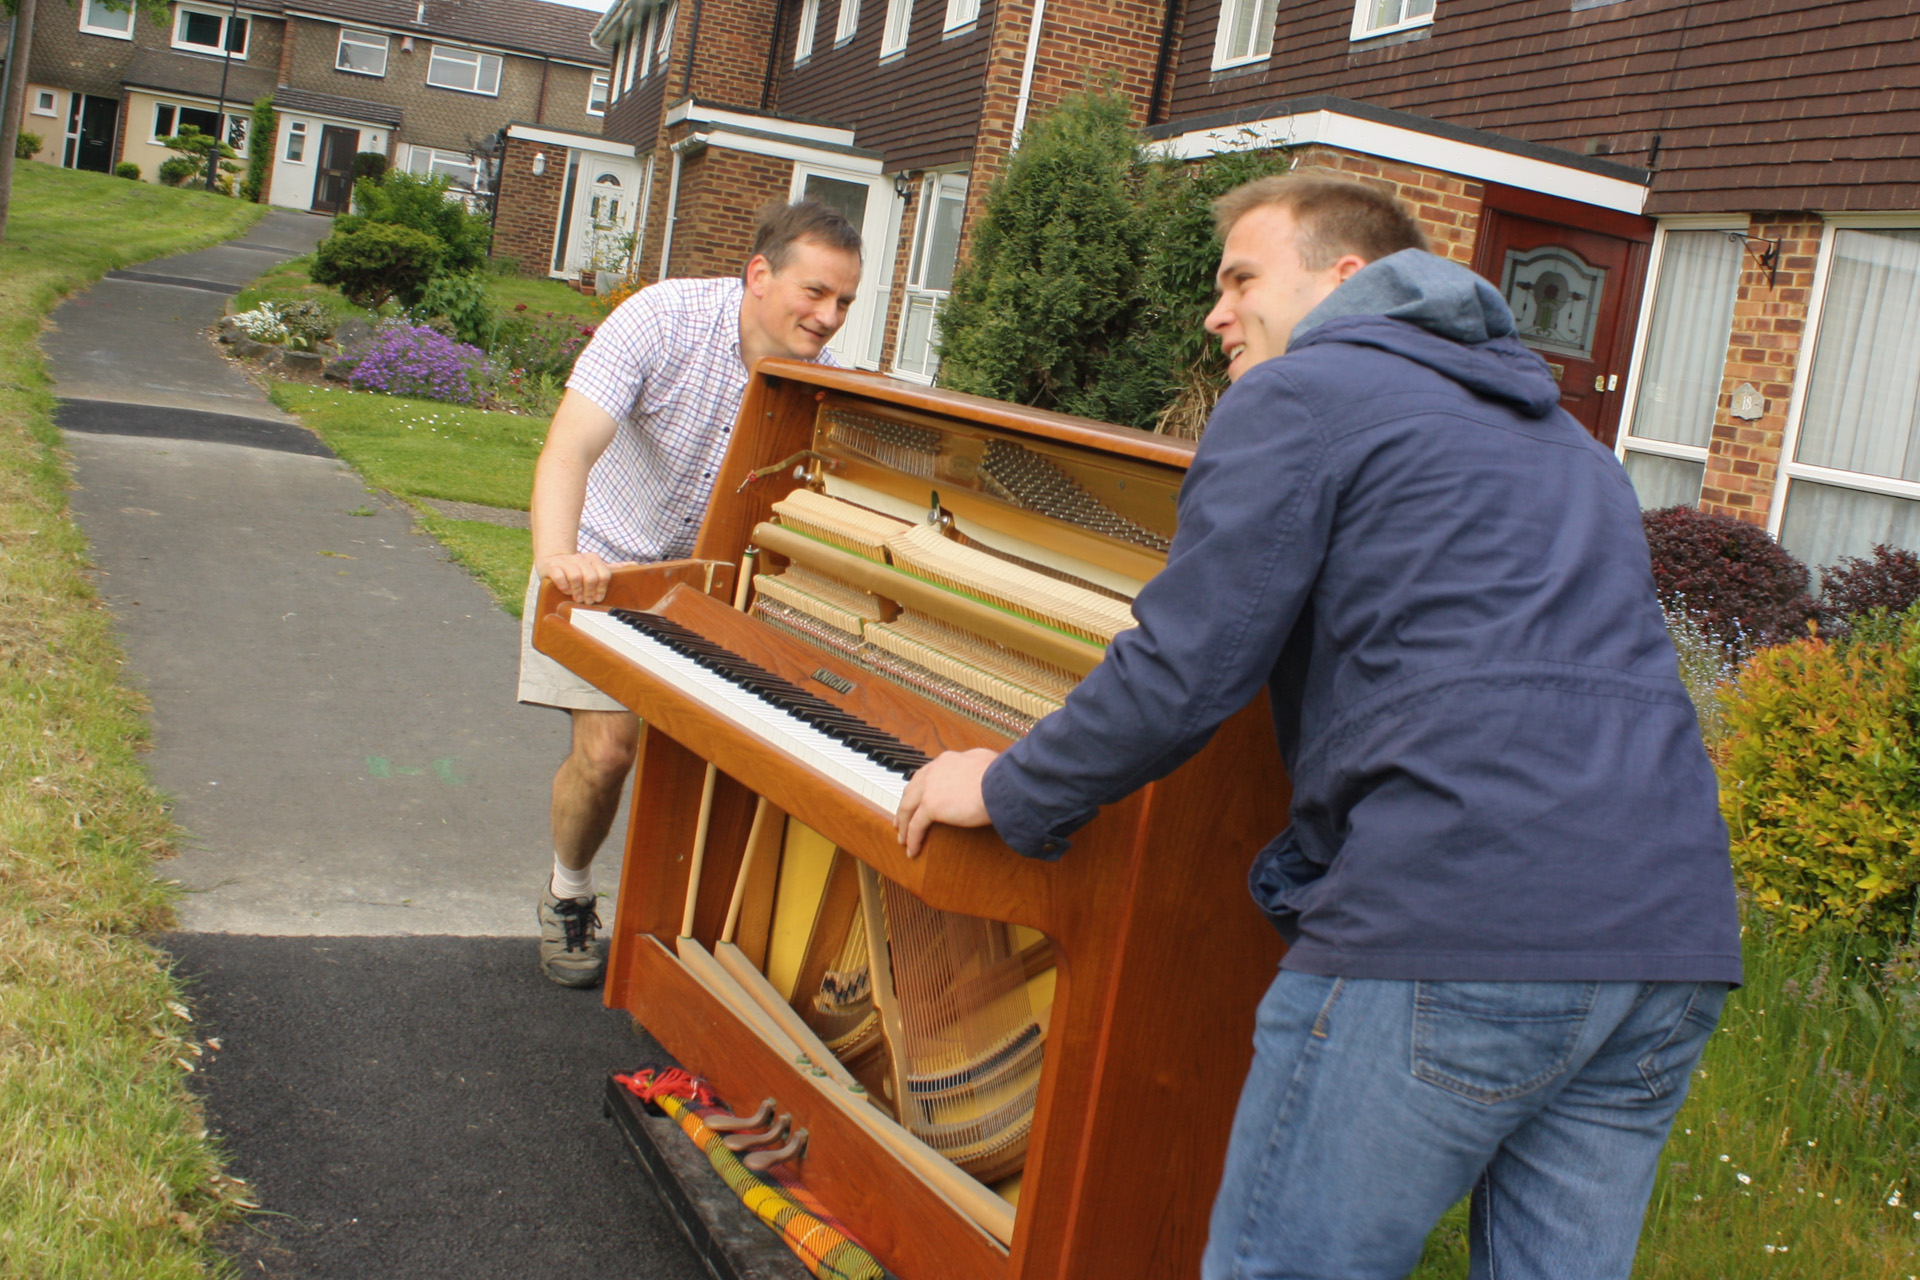 Moving the instrument would have been virtually impossible, were it not for a handy trolley, leant to us for the job.